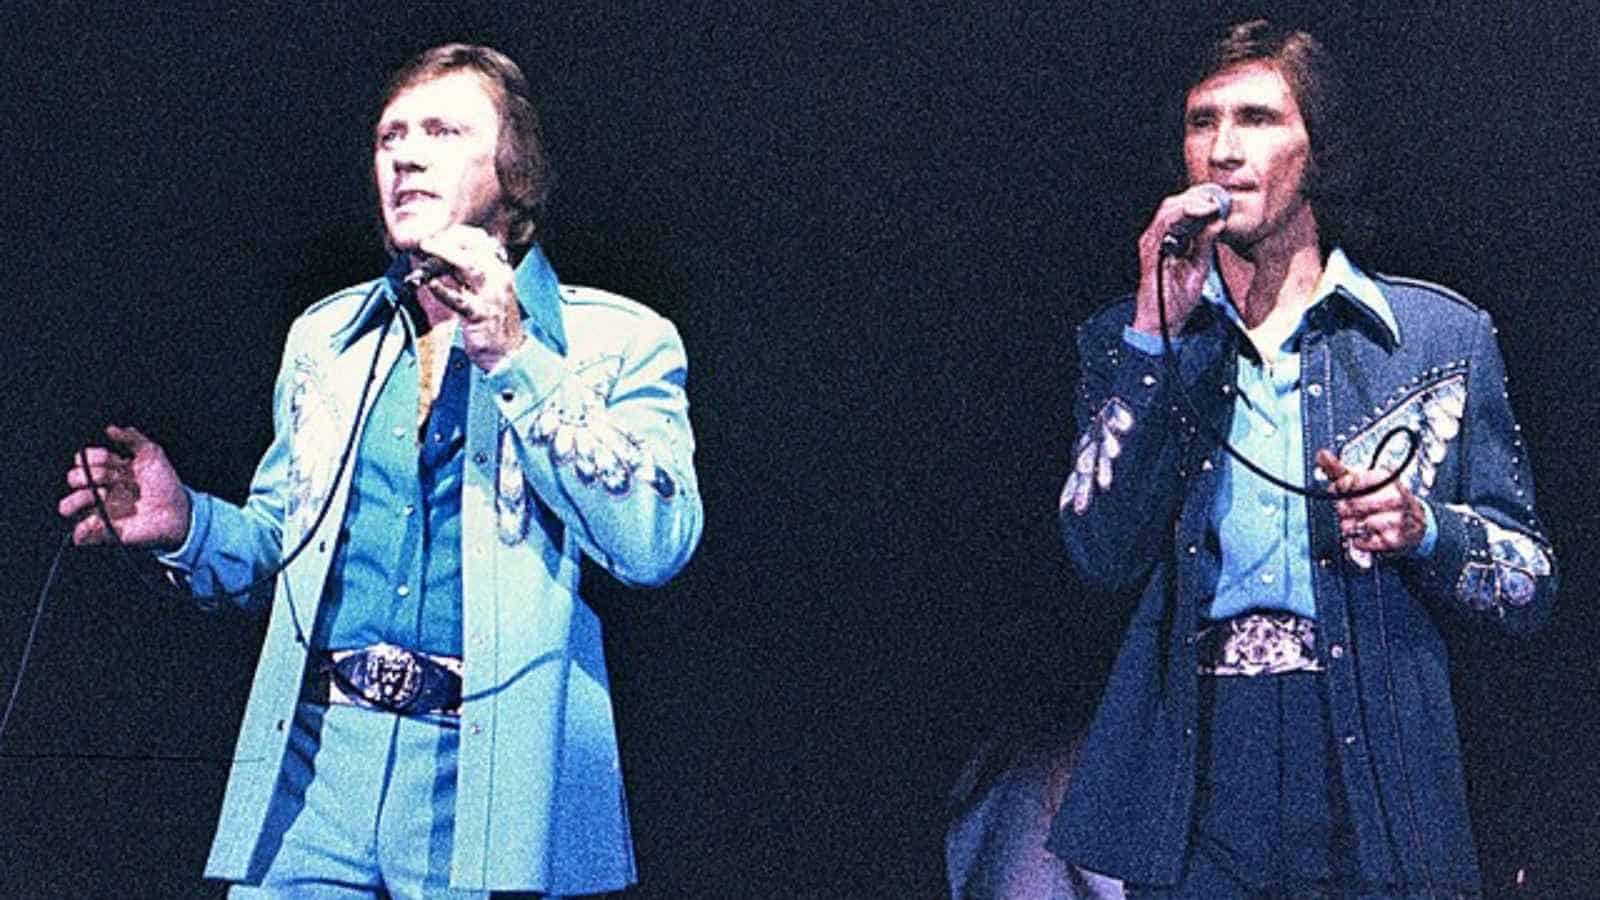 <p>This iconic song has been covered countless times, but the version by The Righteous Brothers stands out as one of the most memorable. This song captures the longing and intensity of love.</p>